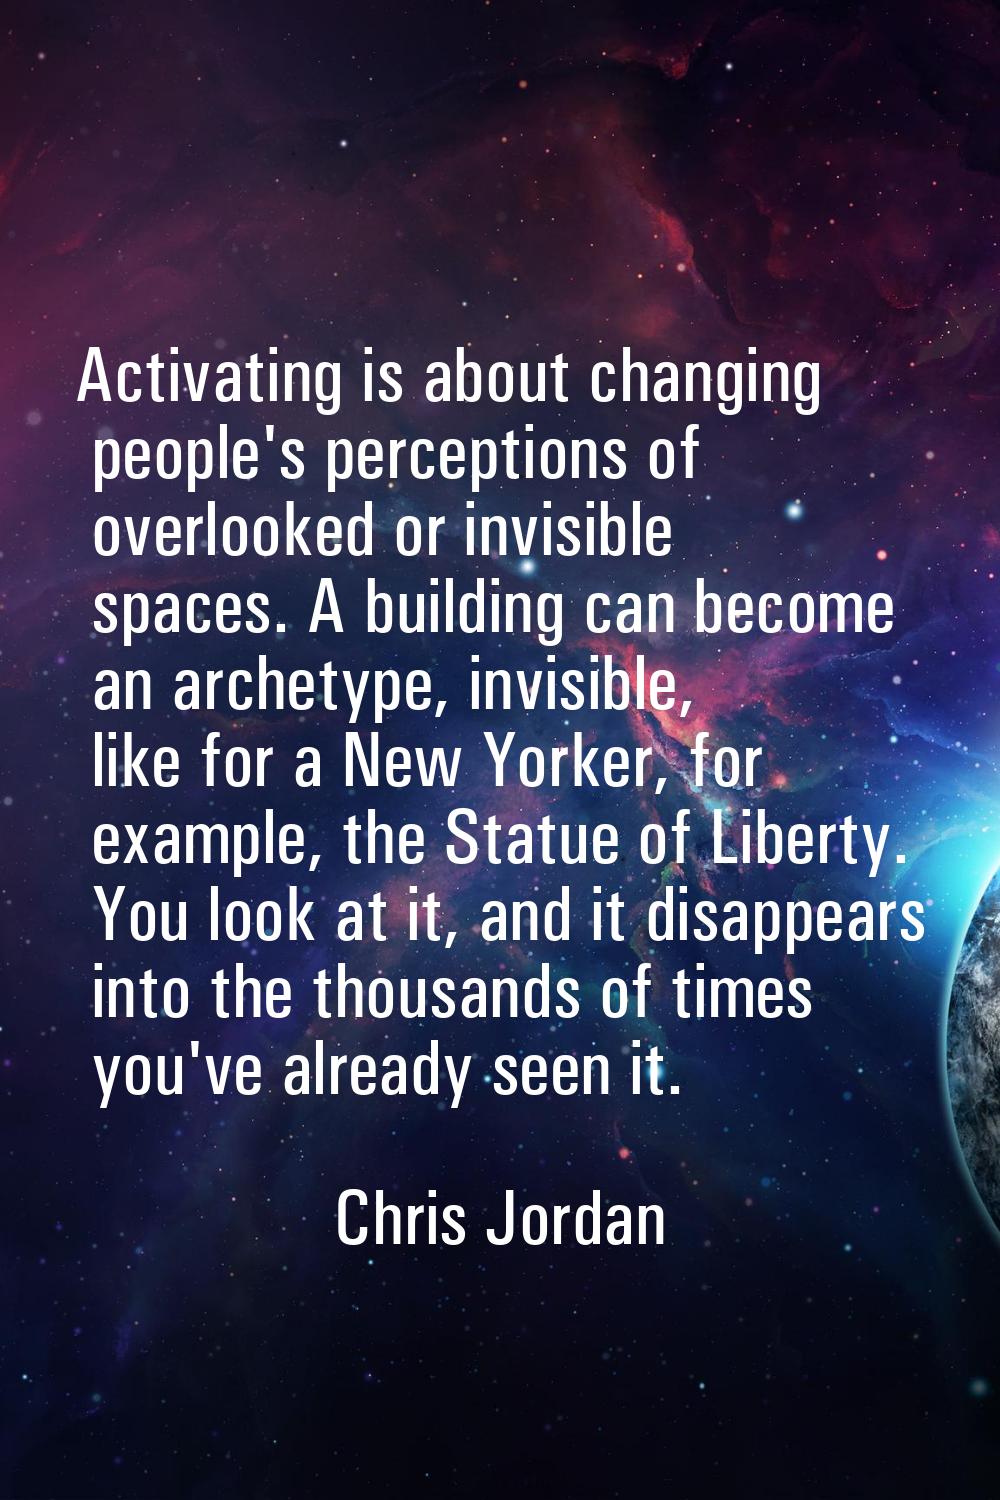 Activating is about changing people's perceptions of overlooked or invisible spaces. A building can